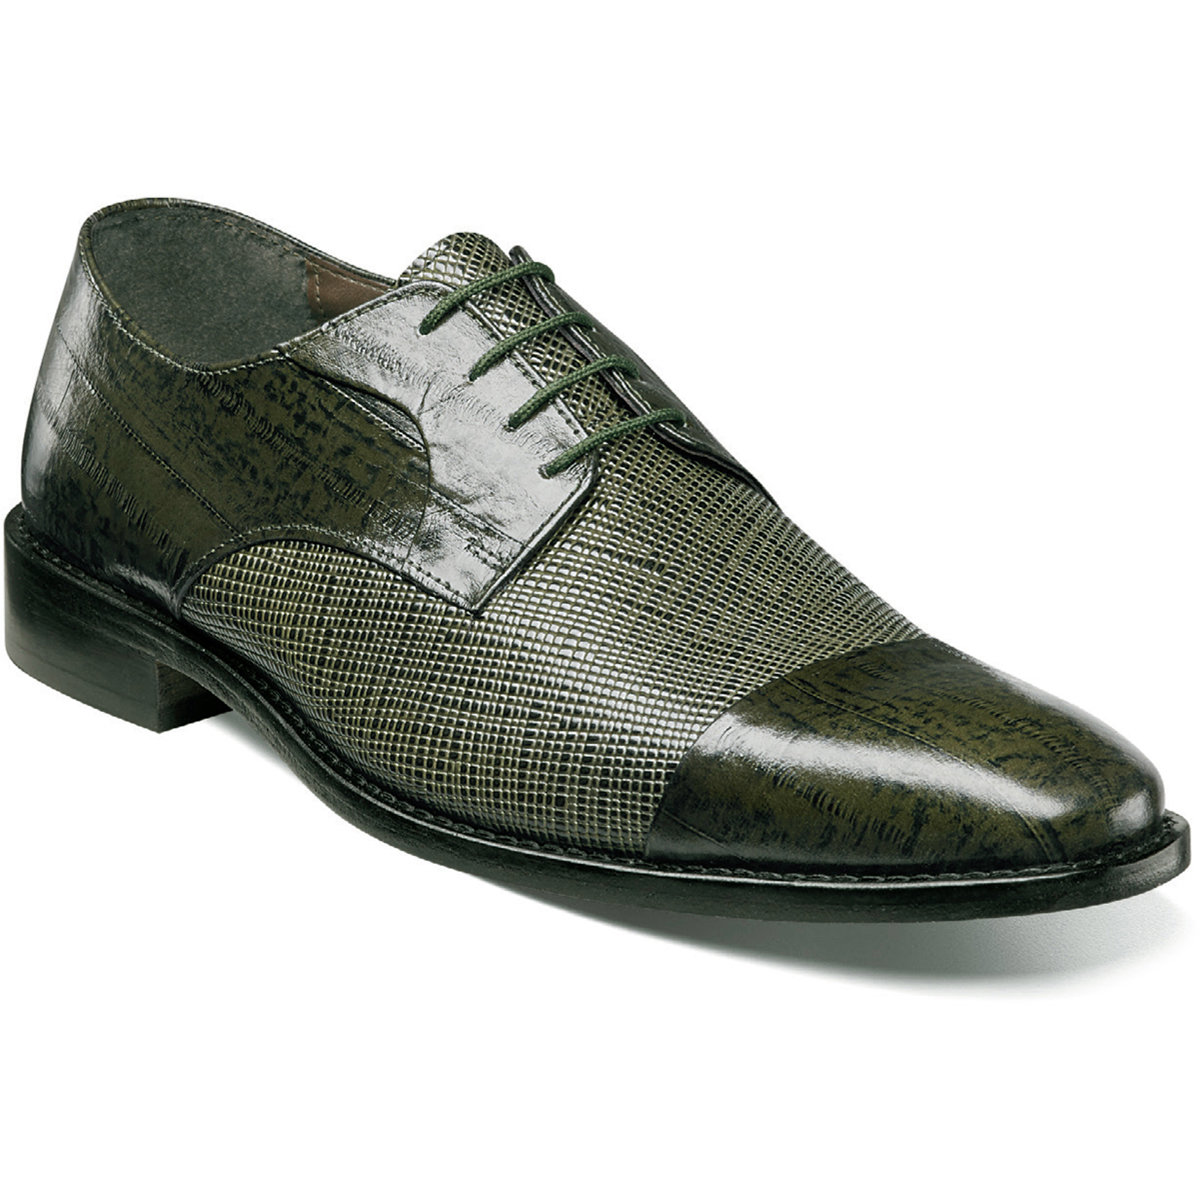 Clearance Shoes | Olive Cap Toe Lace Up | Stacy Adams Gatto